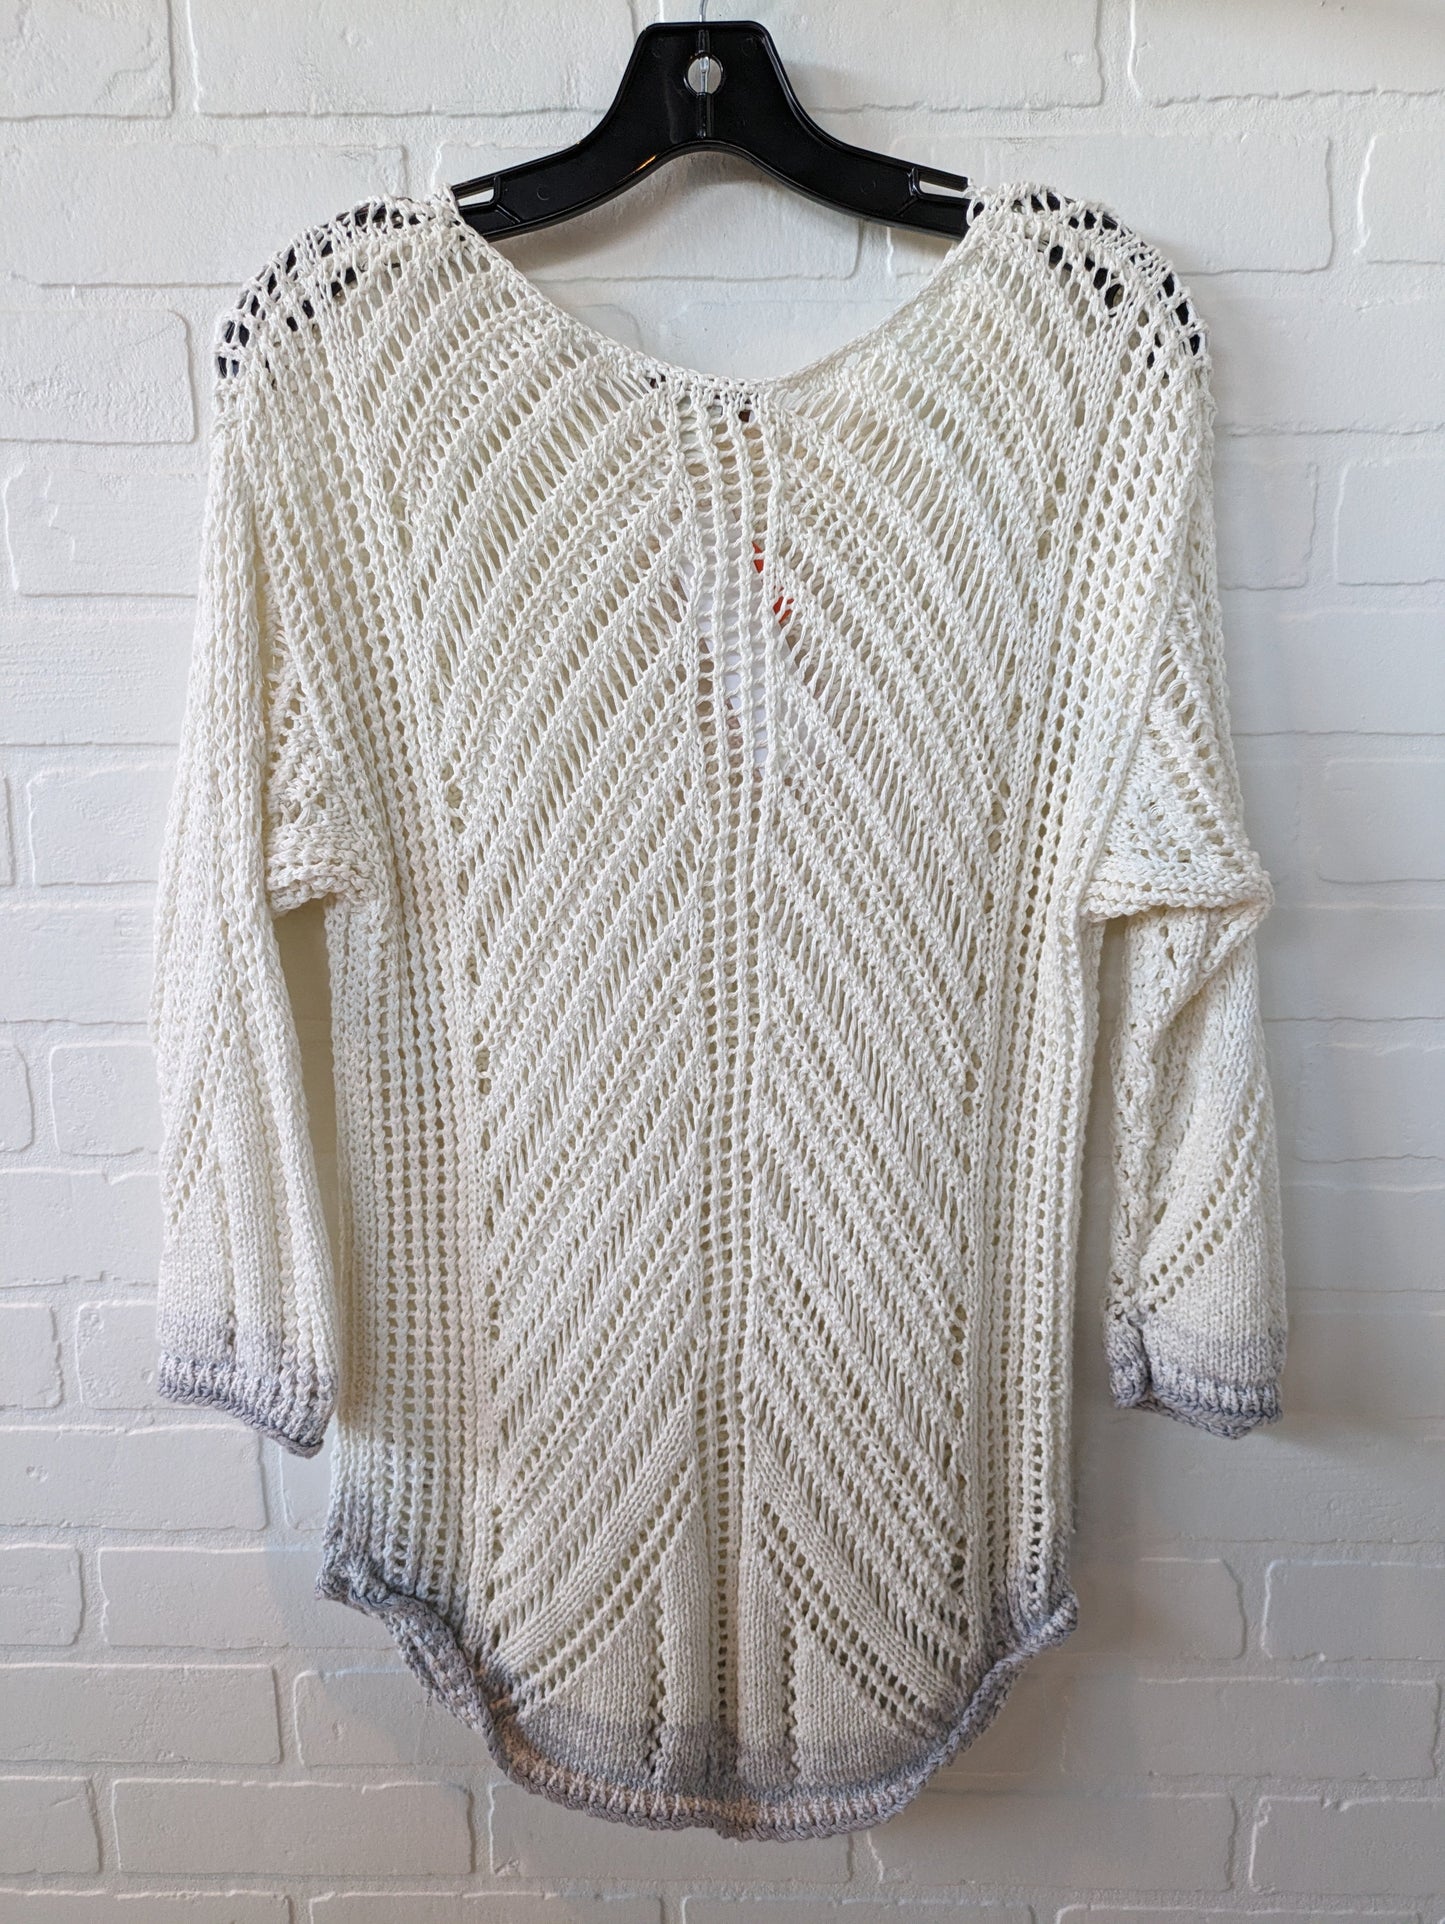 Sweater By Coldwater Creek  Size: L